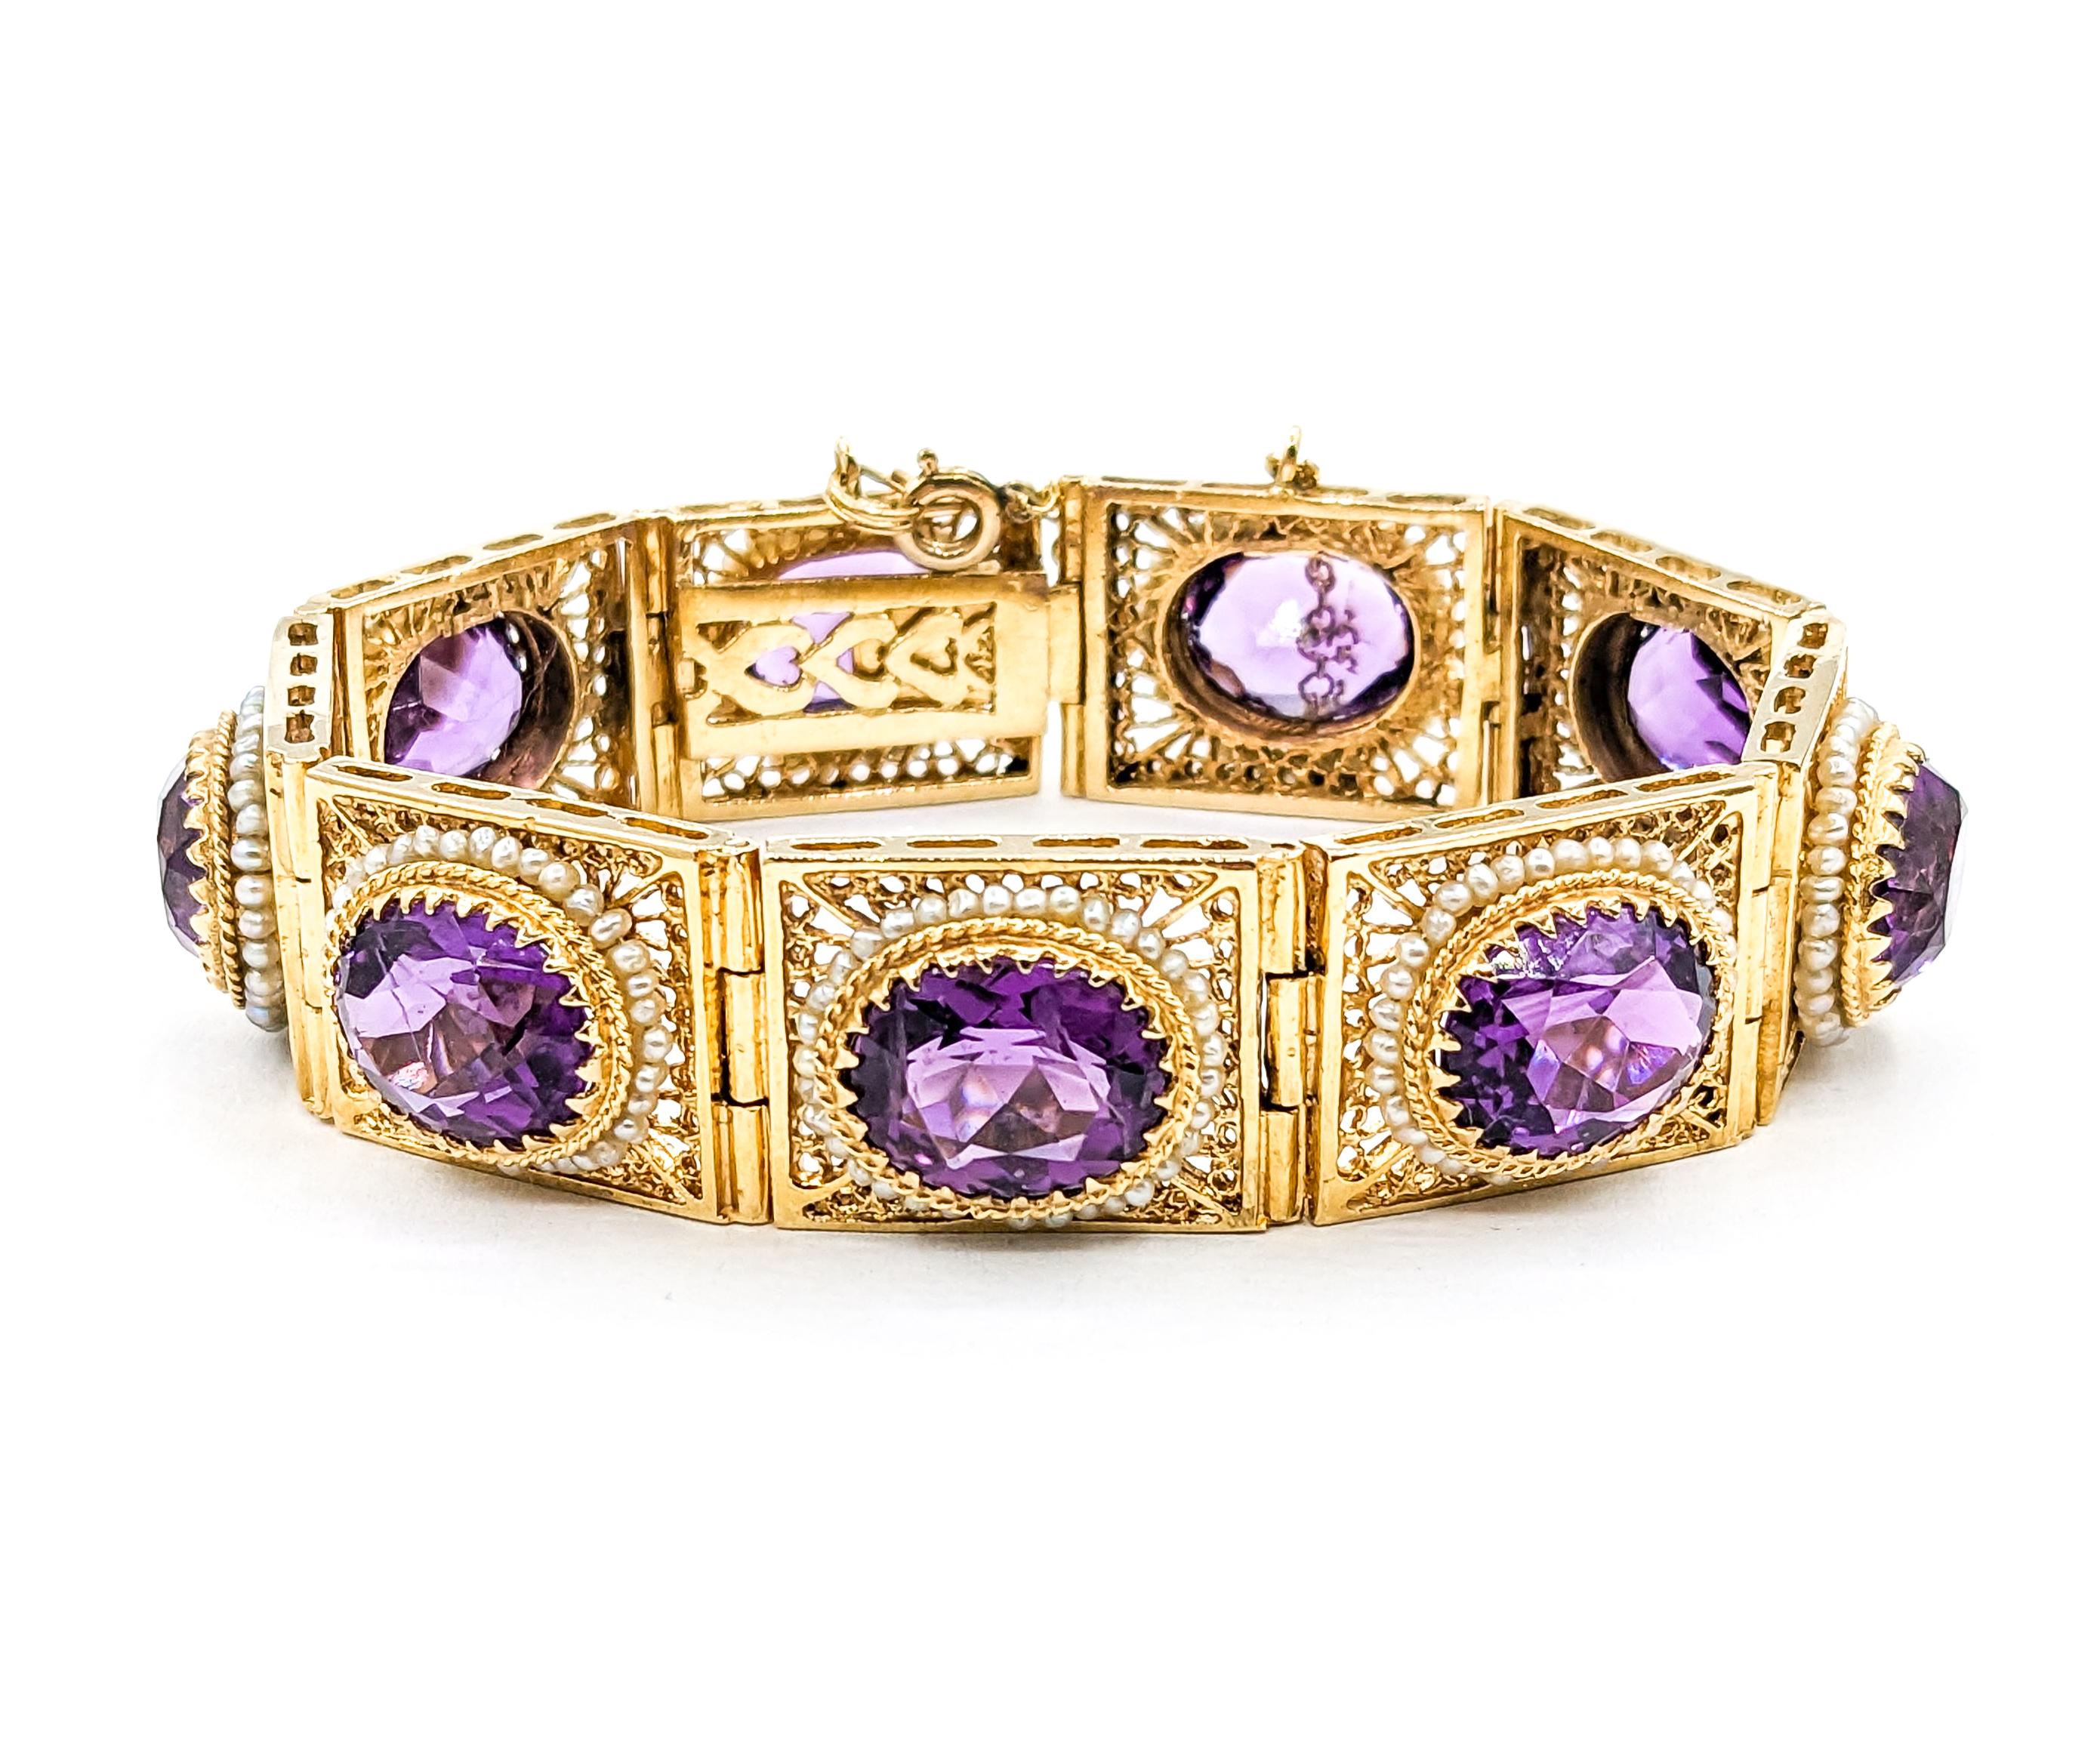 Vintage 40ctw Amethysts & Seed Pearls Bracelet In Yellow Gold

Indulge in the opulence of yesteryear with this magnificent vintage bracelet, lovingly crafted from 14kt yellow gold. It boasts an impressive array of oval amethysts, collectively